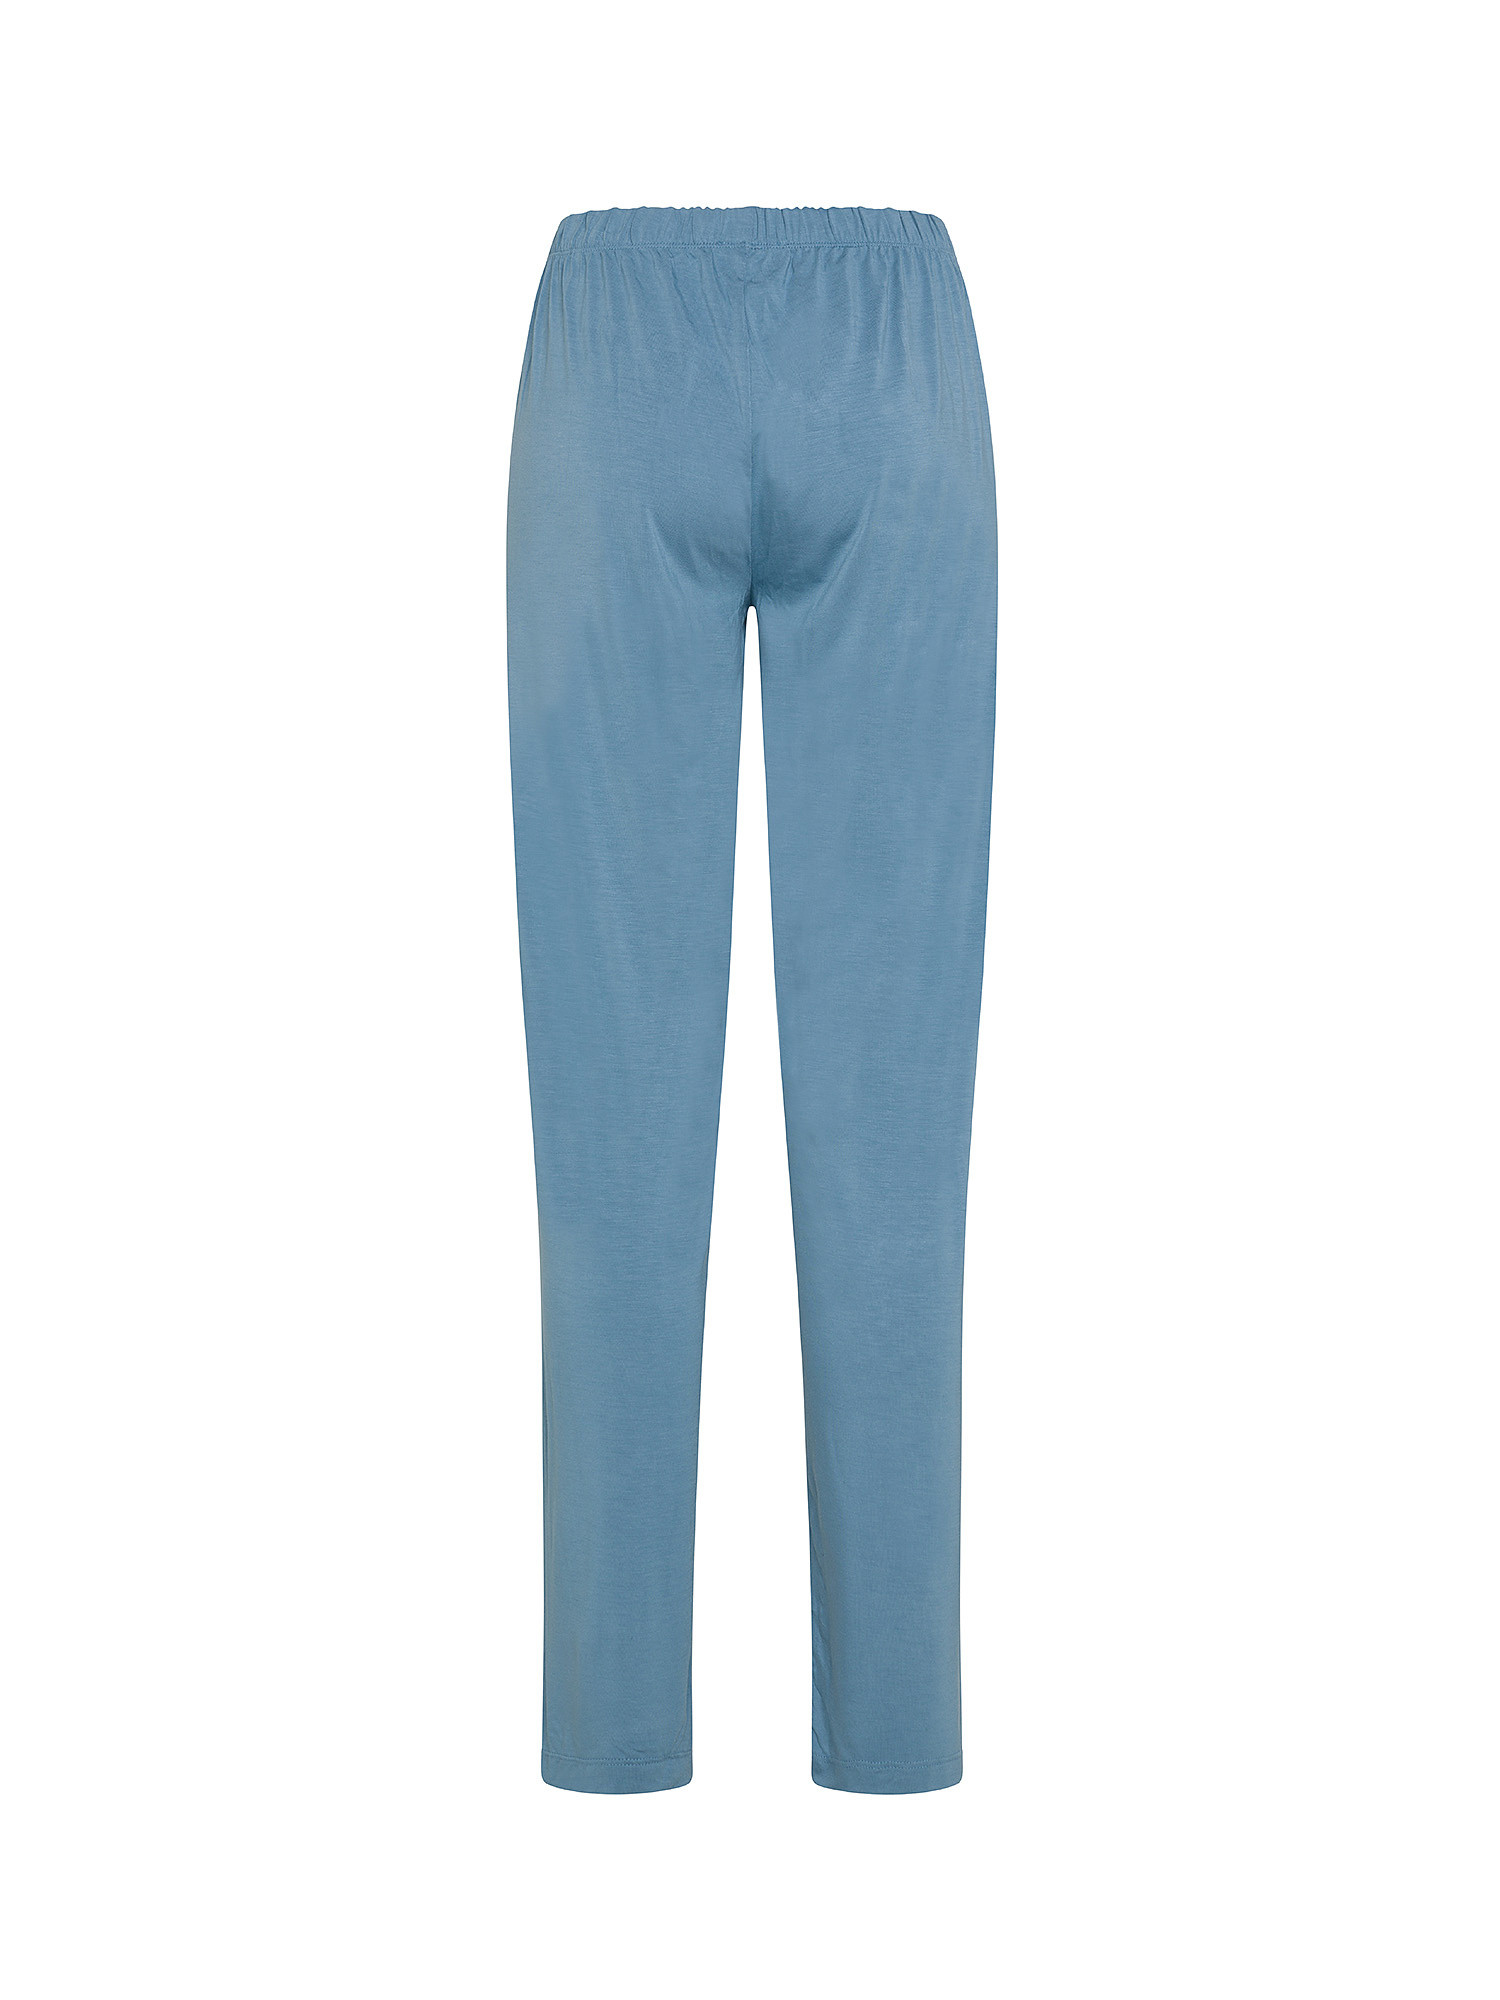 Solid color bamboo viscose trousers, Light Blue, large image number 1